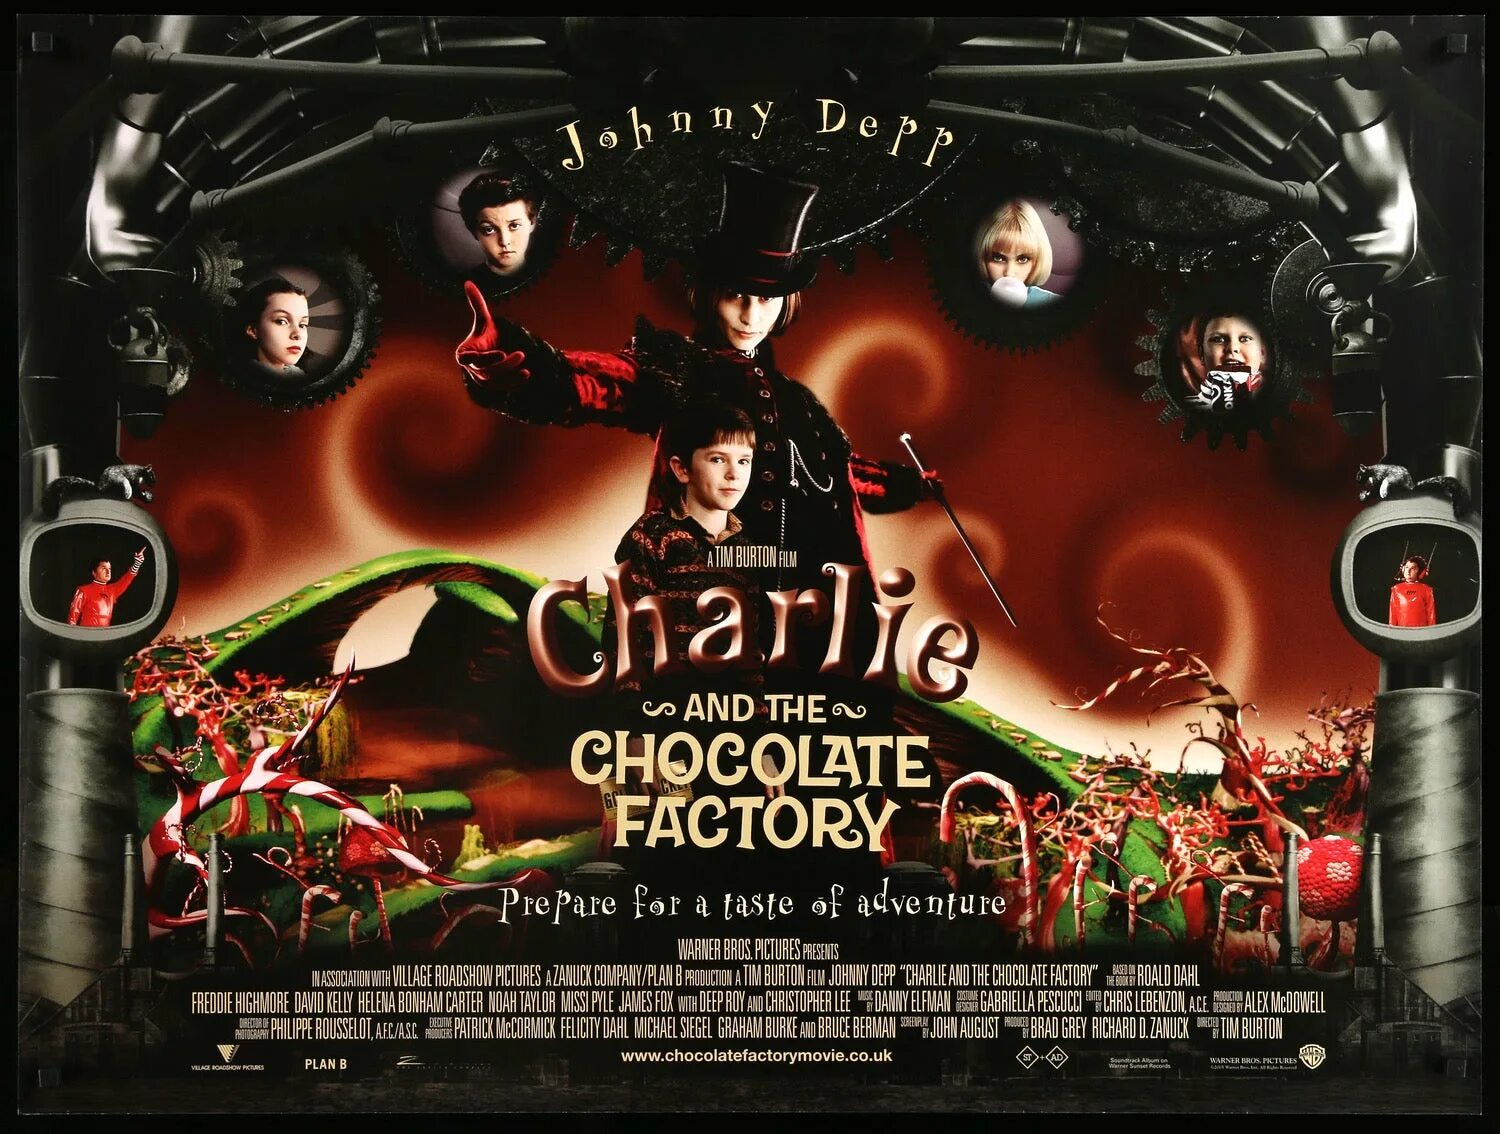 Charlie and the Chocolate Factory 2005 poster. Charlie and the Chocolate Factory Постер. Charlie and the Chocolate Factory 2005 обложка. Чарли и шоколадная фабрика афиша. Шоколадная фабрика содержание